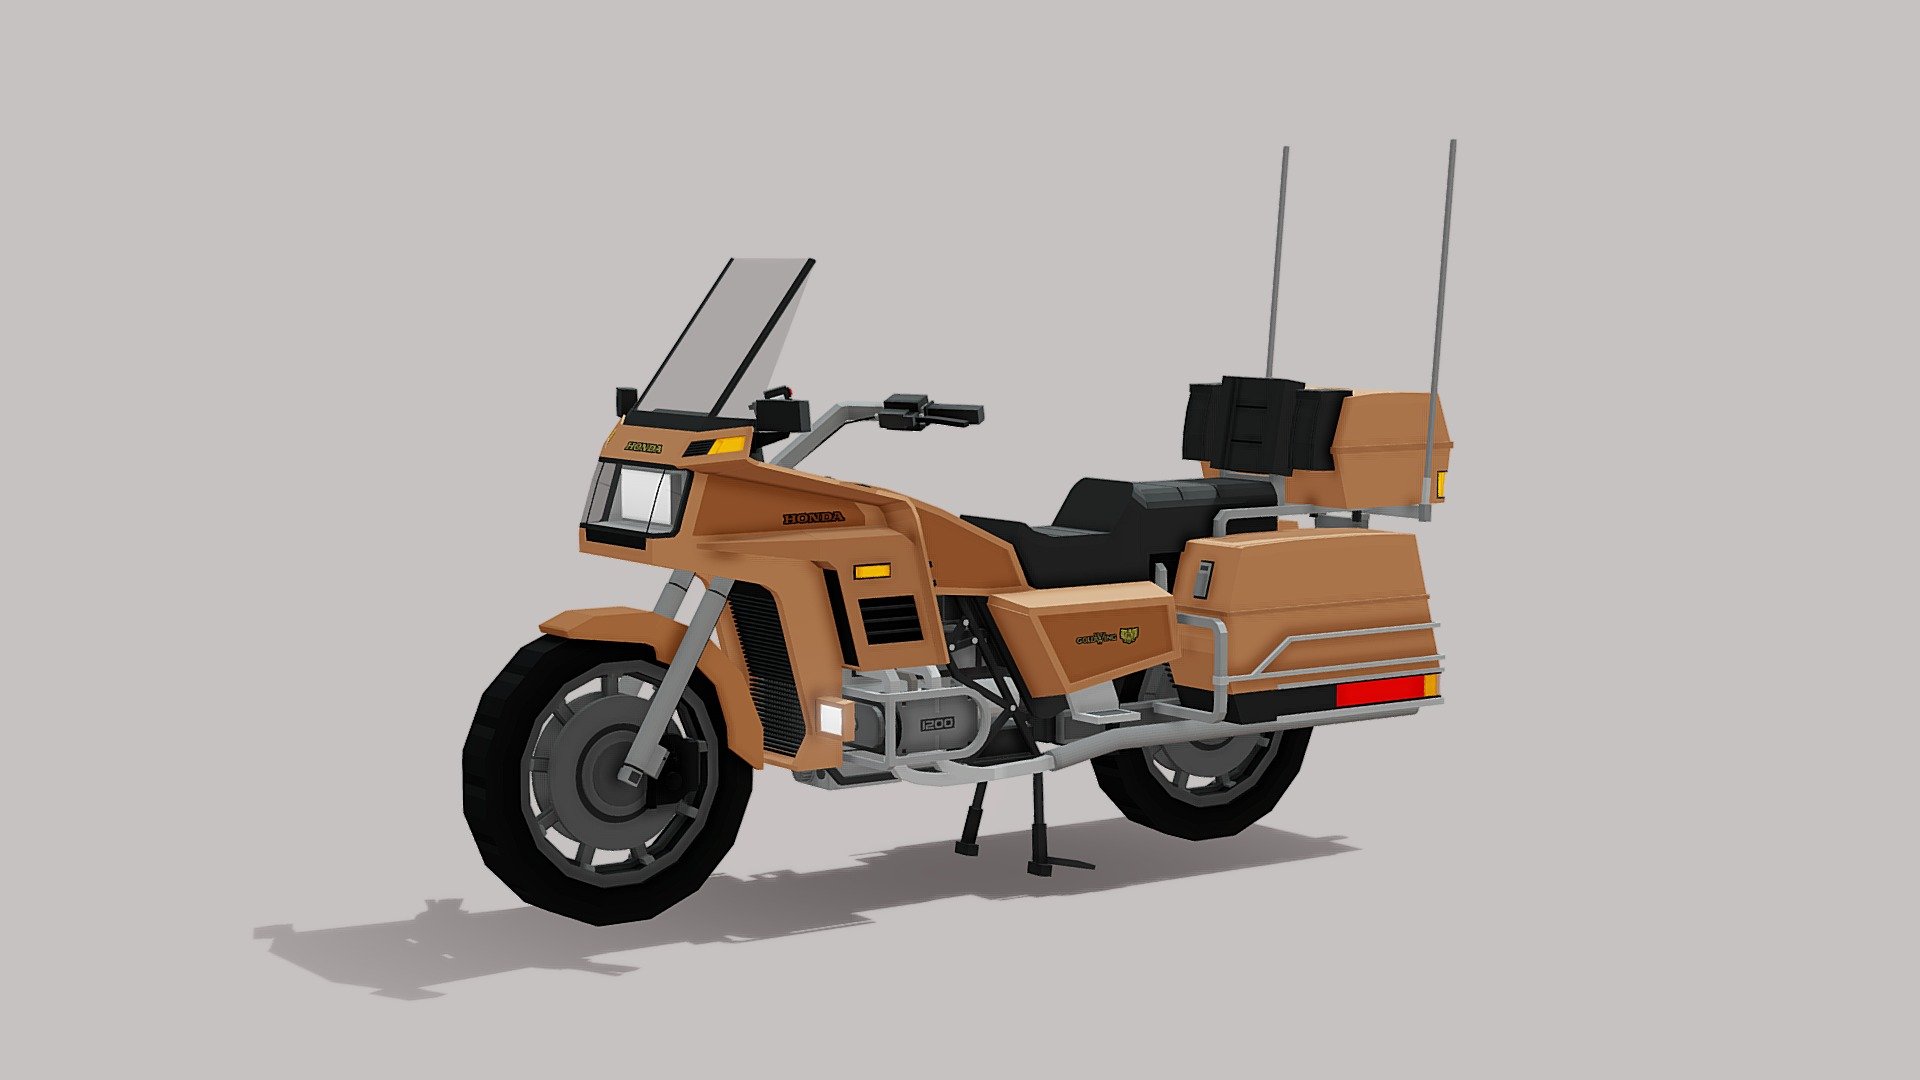 A Minecraft replica of the 1984 Honda Gold Wing GL1200. A Minecraft: Bedrock Edition to be used as a working model in my MCBE addon. To be posted to MCPEDL 3d model